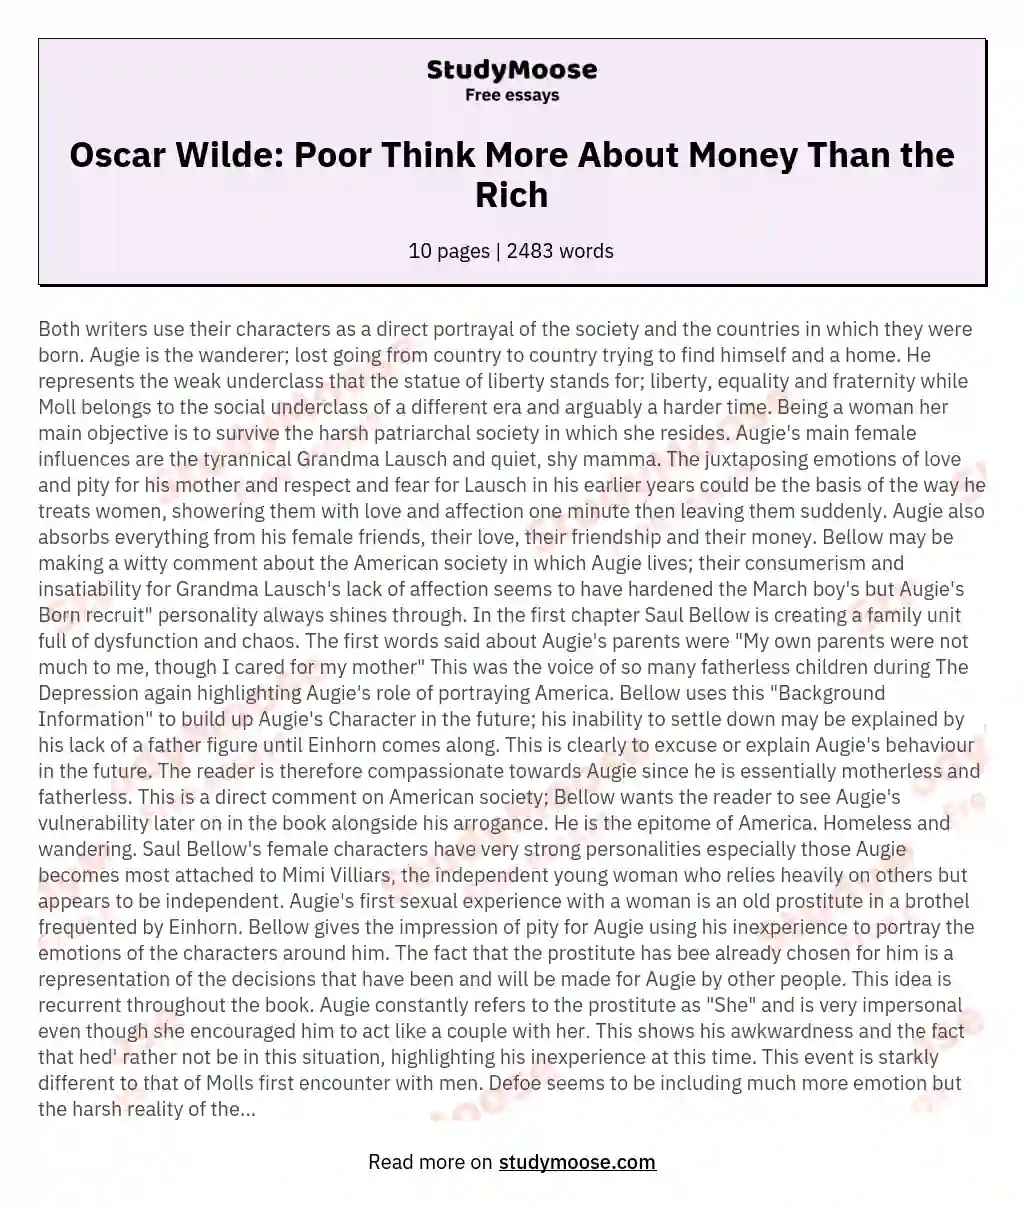 It was Oscar Wilde who said "There is only one class in the community that thinks more about money than the rich, and that is the poor"